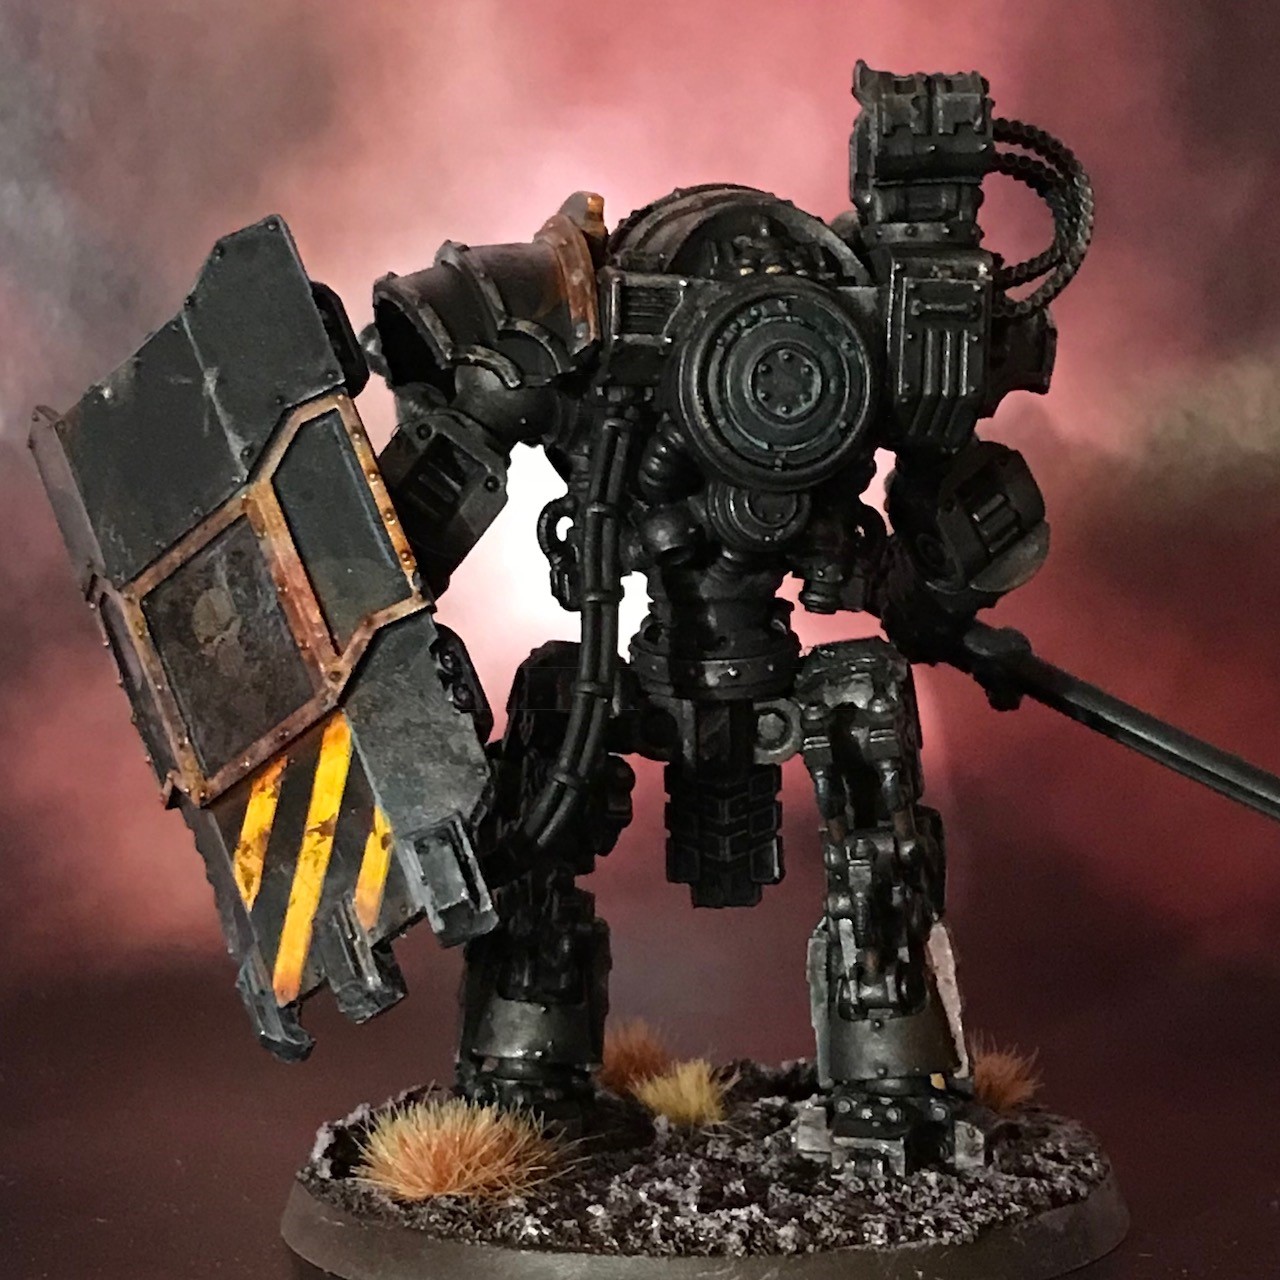 Adeptus Titanicus: the staggering Warhammer 40,000 game where stories loom  as large as mechs